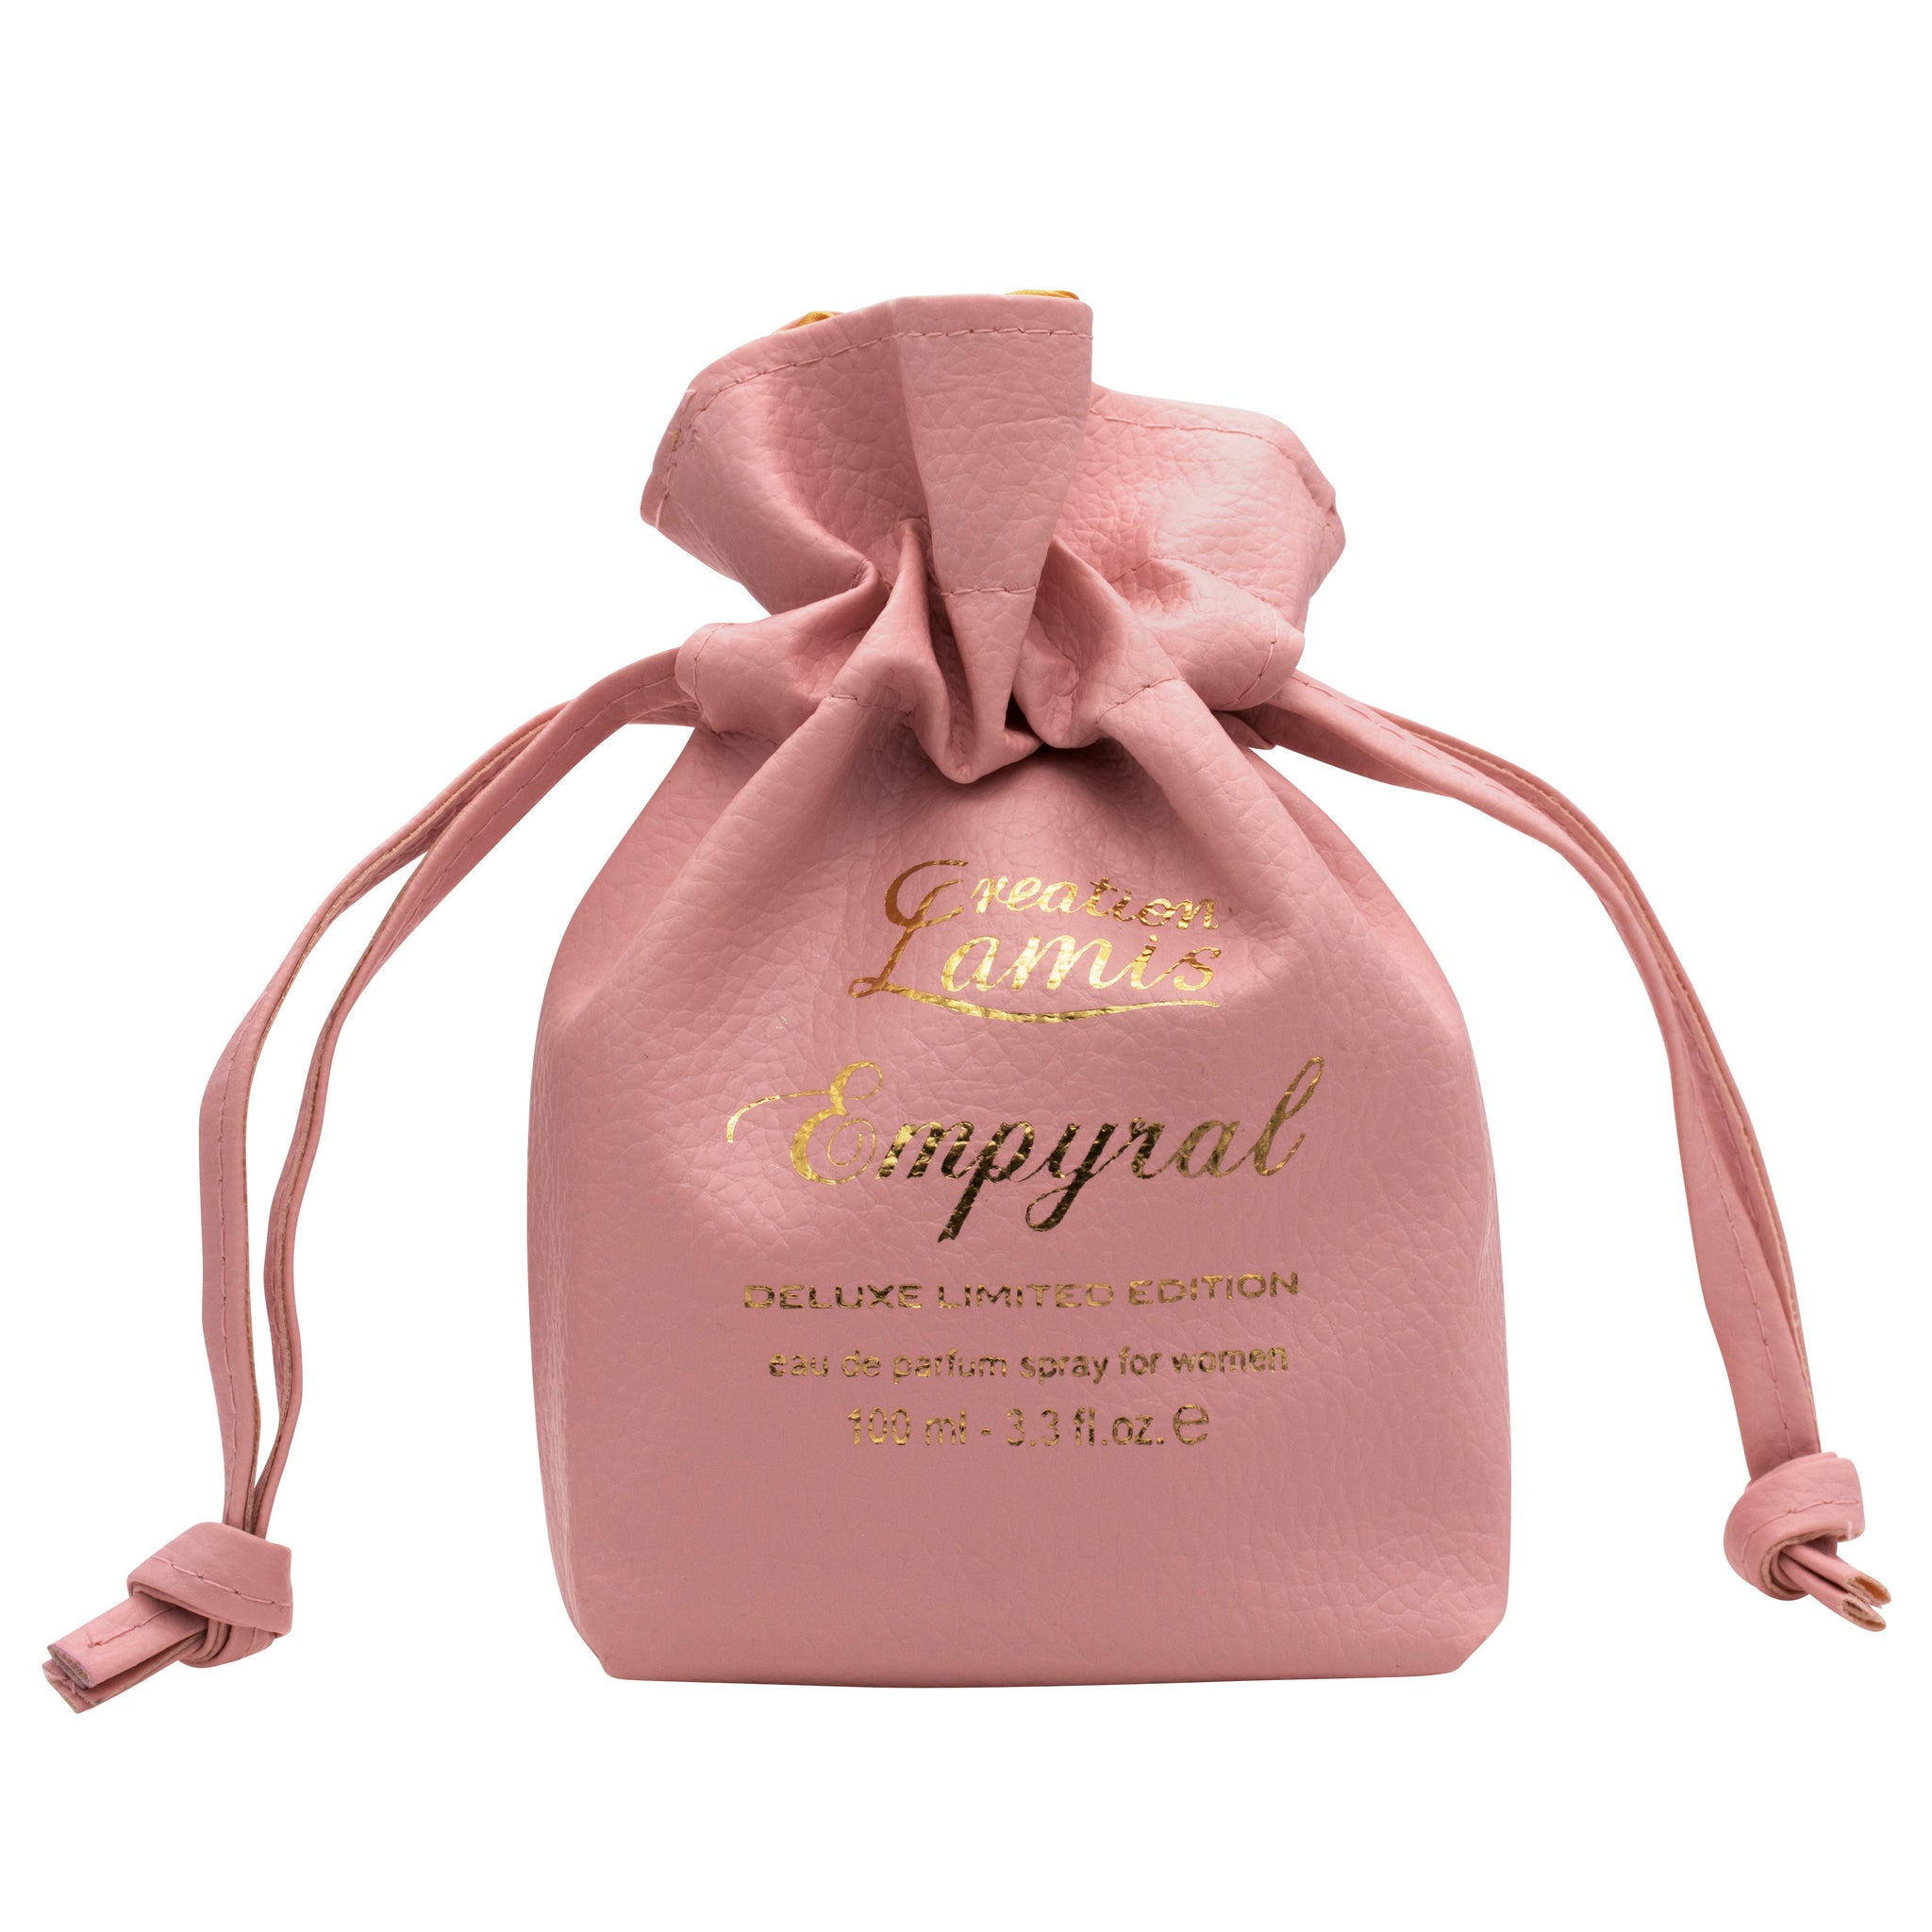 Empyral - Deluxe Edition for Women